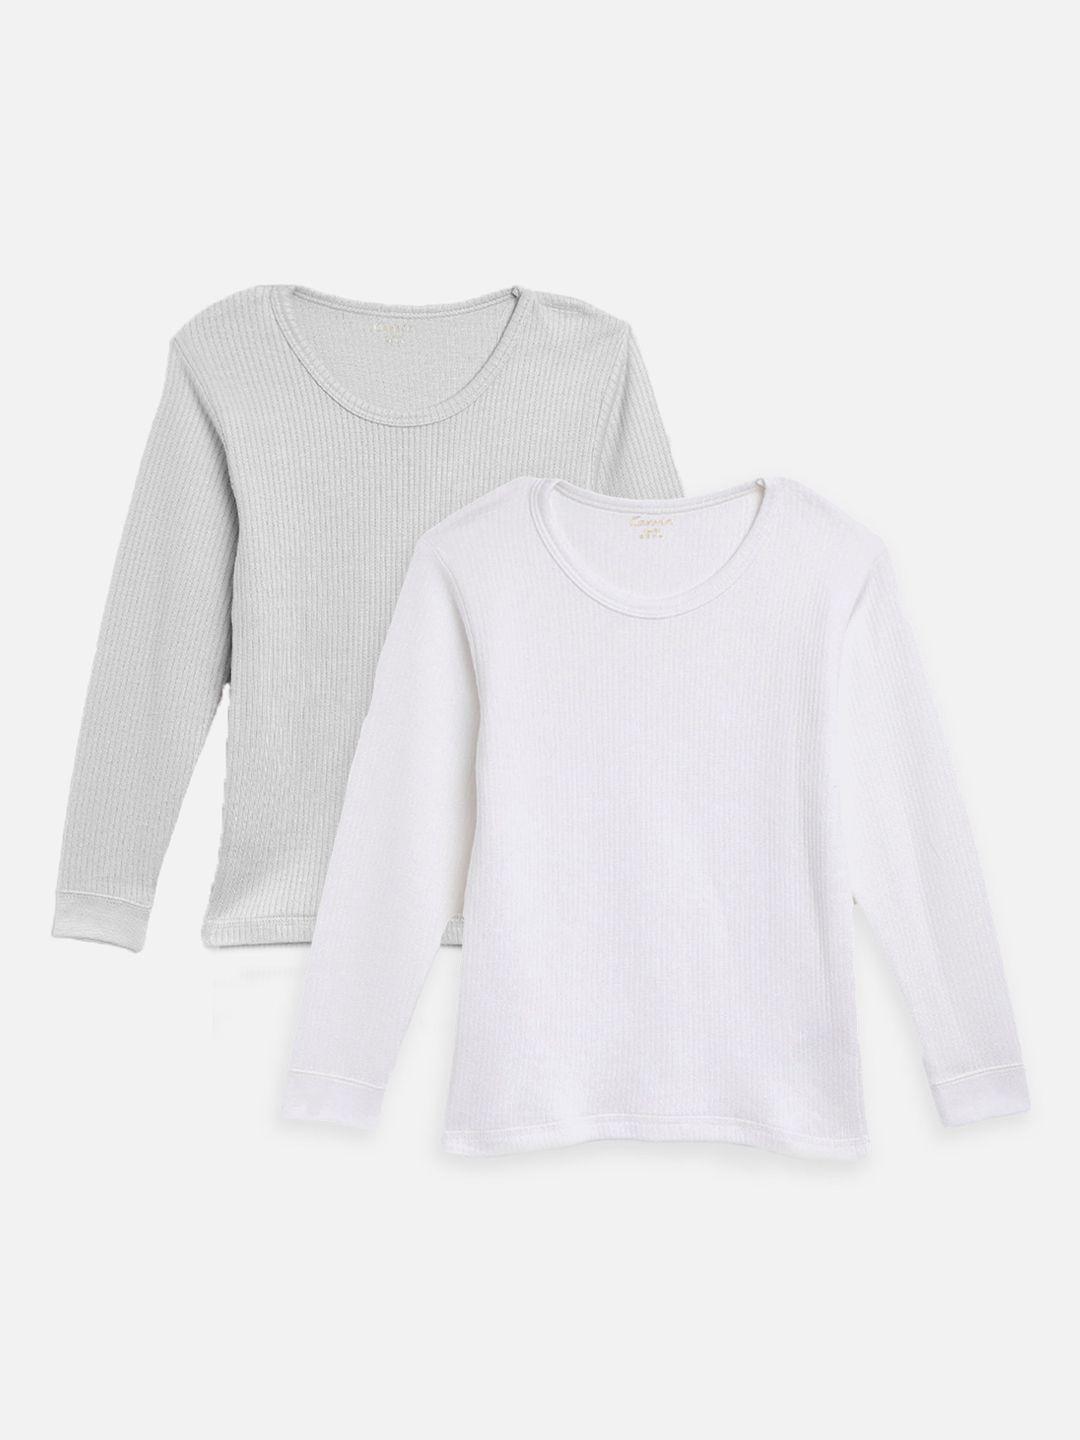 kanvin boys pack of 2 white & grey ribbed cotton thermal tops